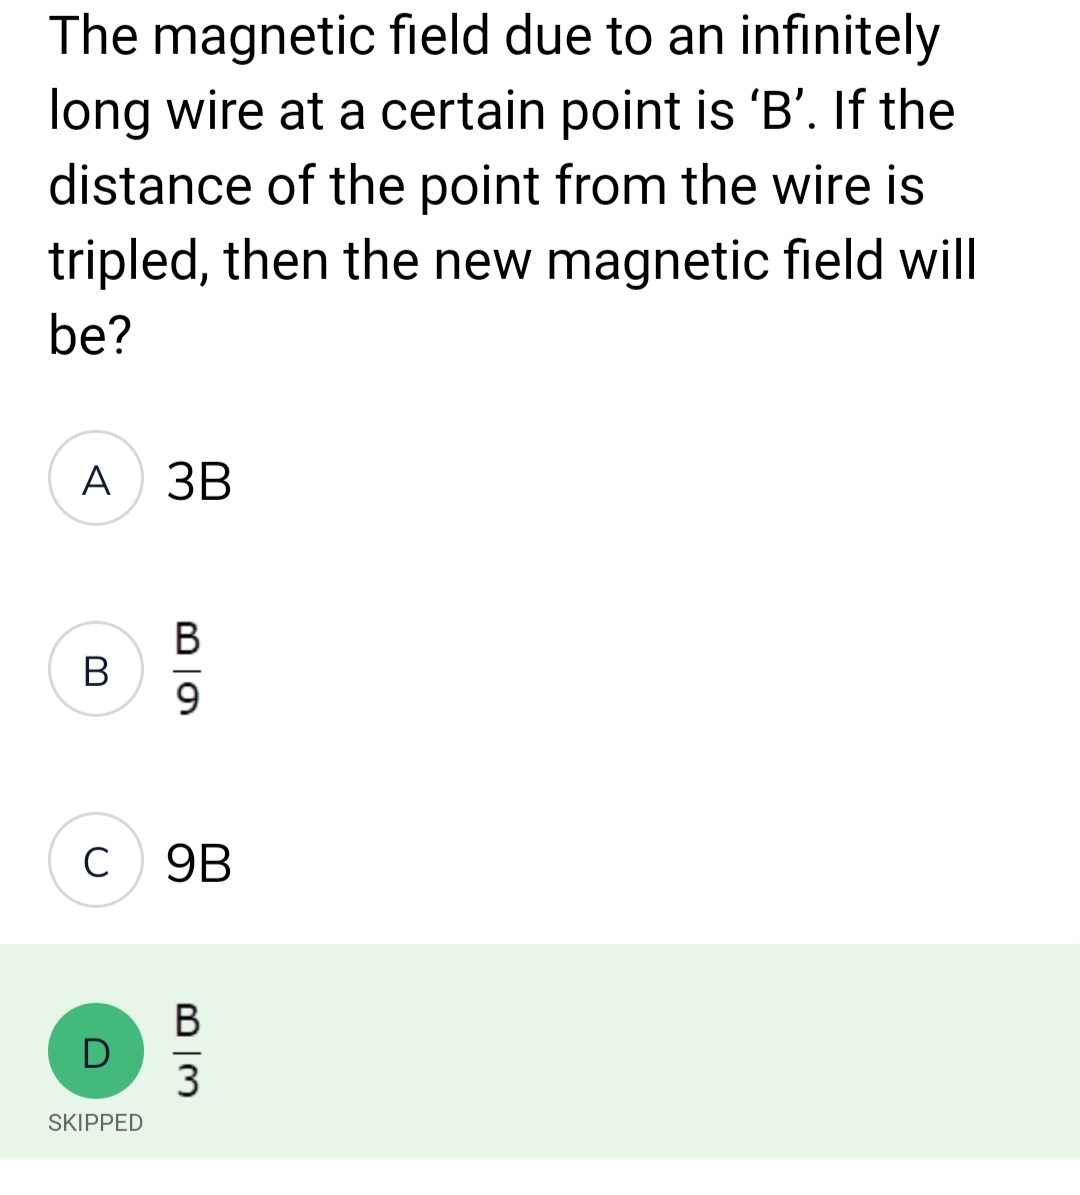 The magnetic field due to an infinitely
long wire at a certain point is 'B'. If the
distance of the point from the wire is
tripled, then the new magnetic field will
be?
A 3B
B
C
D
SKIPPED
B
9
9B
B
3